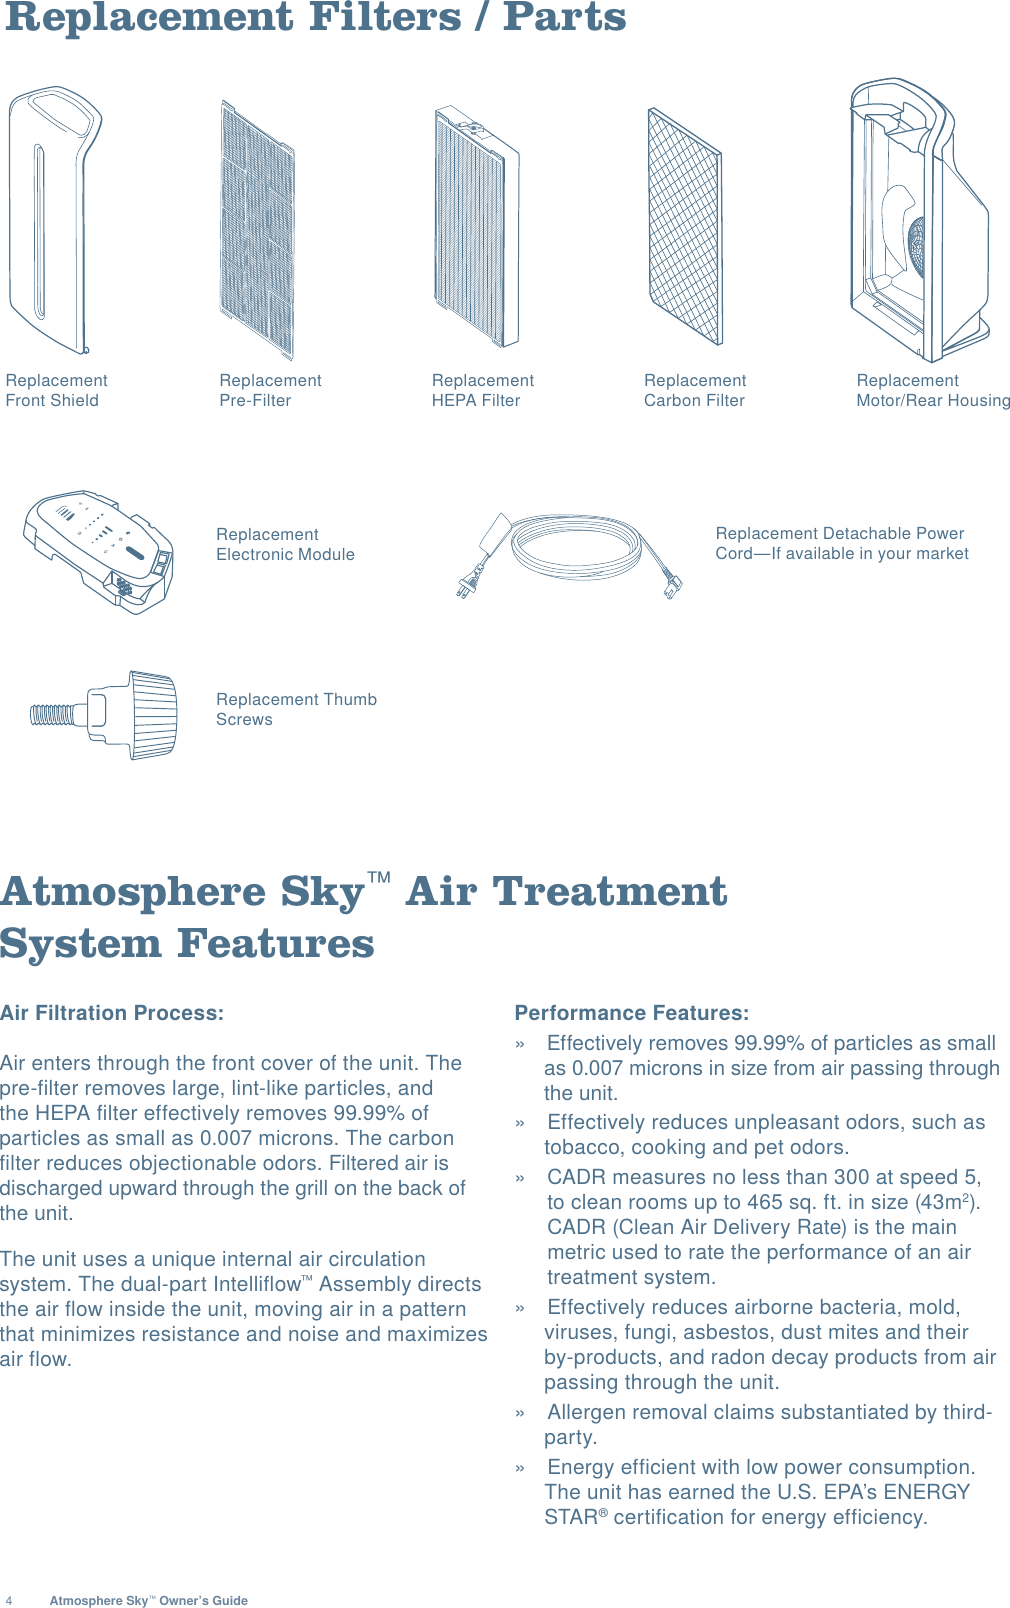 4Atmosphere Sky™ Owner’s GuideReplacement Filters / PartsAtmosphere Sky™ Air Treatment  System FeaturesAir Filtration Process: Air enters through the front cover of the unit. The pre-filter removes large, lint-like particles, and the HEPA filter effectively removes 99.99% of particles as small as 0.007 microns. The carbon filter reduces objectionable odors. Filtered air is discharged upward through the grill on the back of the unit.The unit uses a unique internal air circulation system. The dual-part Intelliflow™ Assembly directs the air flow inside the unit, moving air in a pattern that minimizes resistance and noise and maximizes air flow. Performance Features: »  Effectively removes 99.99% of particles as small as 0.007 microns in size from air passing through the unit. »  Effectively reduces unpleasant odors, such as tobacco, cooking and pet odors. »  CADR measures no less than 300 at speed 5, to clean rooms up to 465 sq. ft. in size (43m2). CADR (Clean Air Delivery Rate) is the main metric used to rate the performance of an air treatment system. »  Effectively reduces airborne bacteria, mold, viruses, fungi, asbestos, dust mites and their by-products, and radon decay products from air passing through the unit. »  Allergen removal claims substantiated by third-party. »  Energy efficient with low power consumption. The unit has earned the U.S. EPA’s ENERGY STAR® certification for energy efficiency.Replacement HEPA FilterReplacement Carbon FilterReplacement  Pre-FilterReplacement Motor/Rear Housing ReplacementFront Shield Replacement Electronic Module Replacement Detachable PowerCord—If available in your marketReplacement Thumb  Screws 